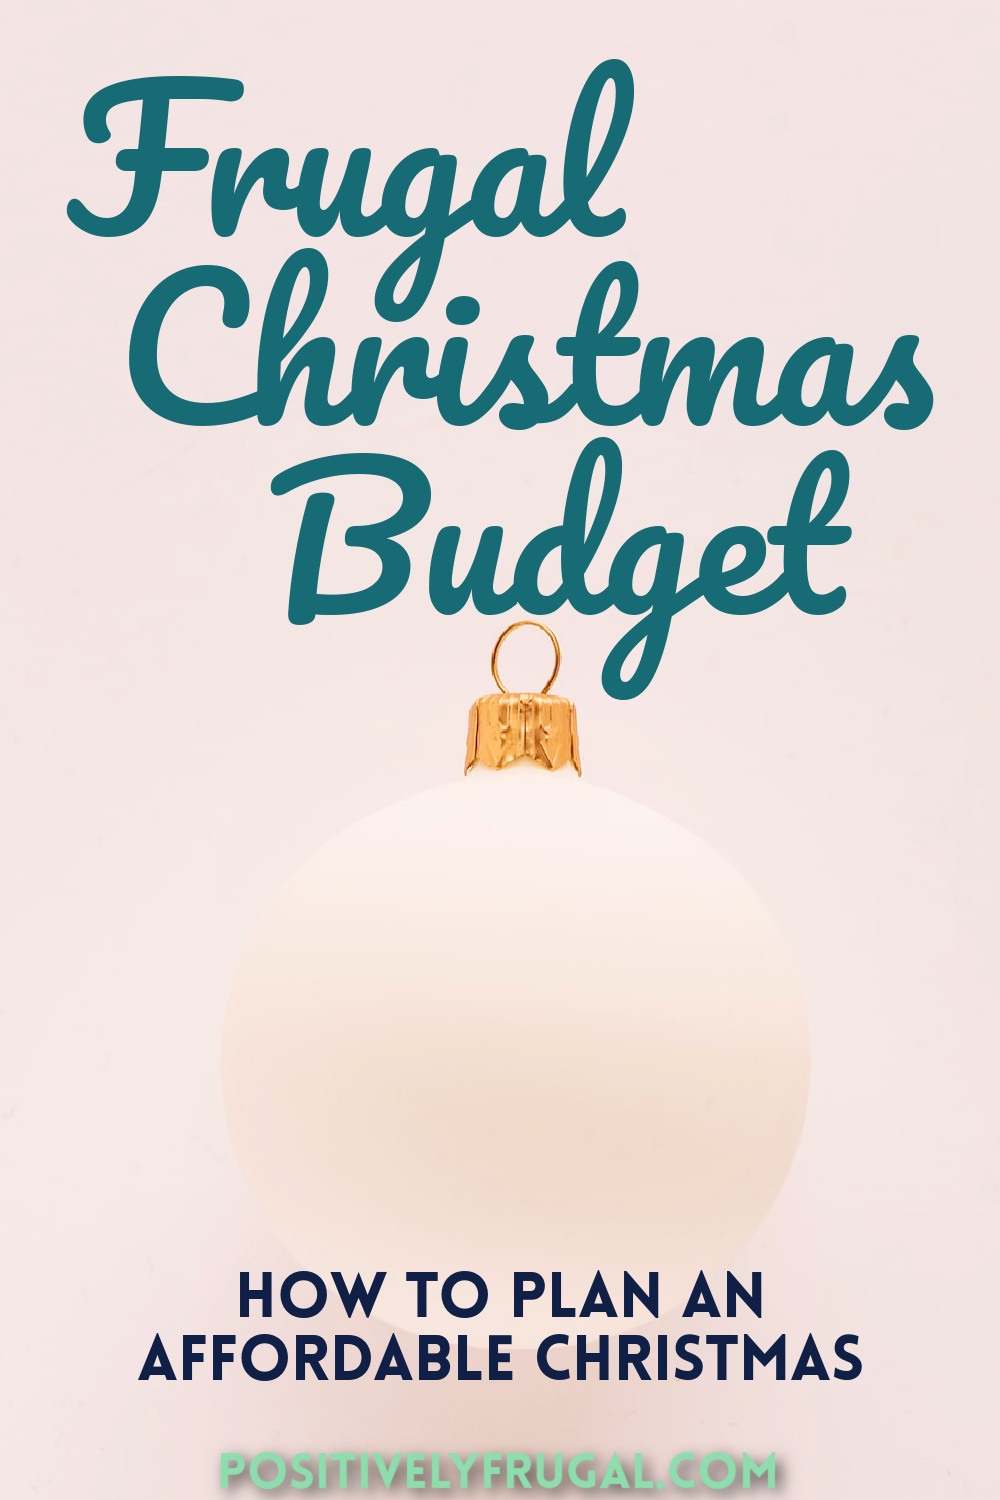 Frugal Christmas Budget by PositivelyFrugal.com